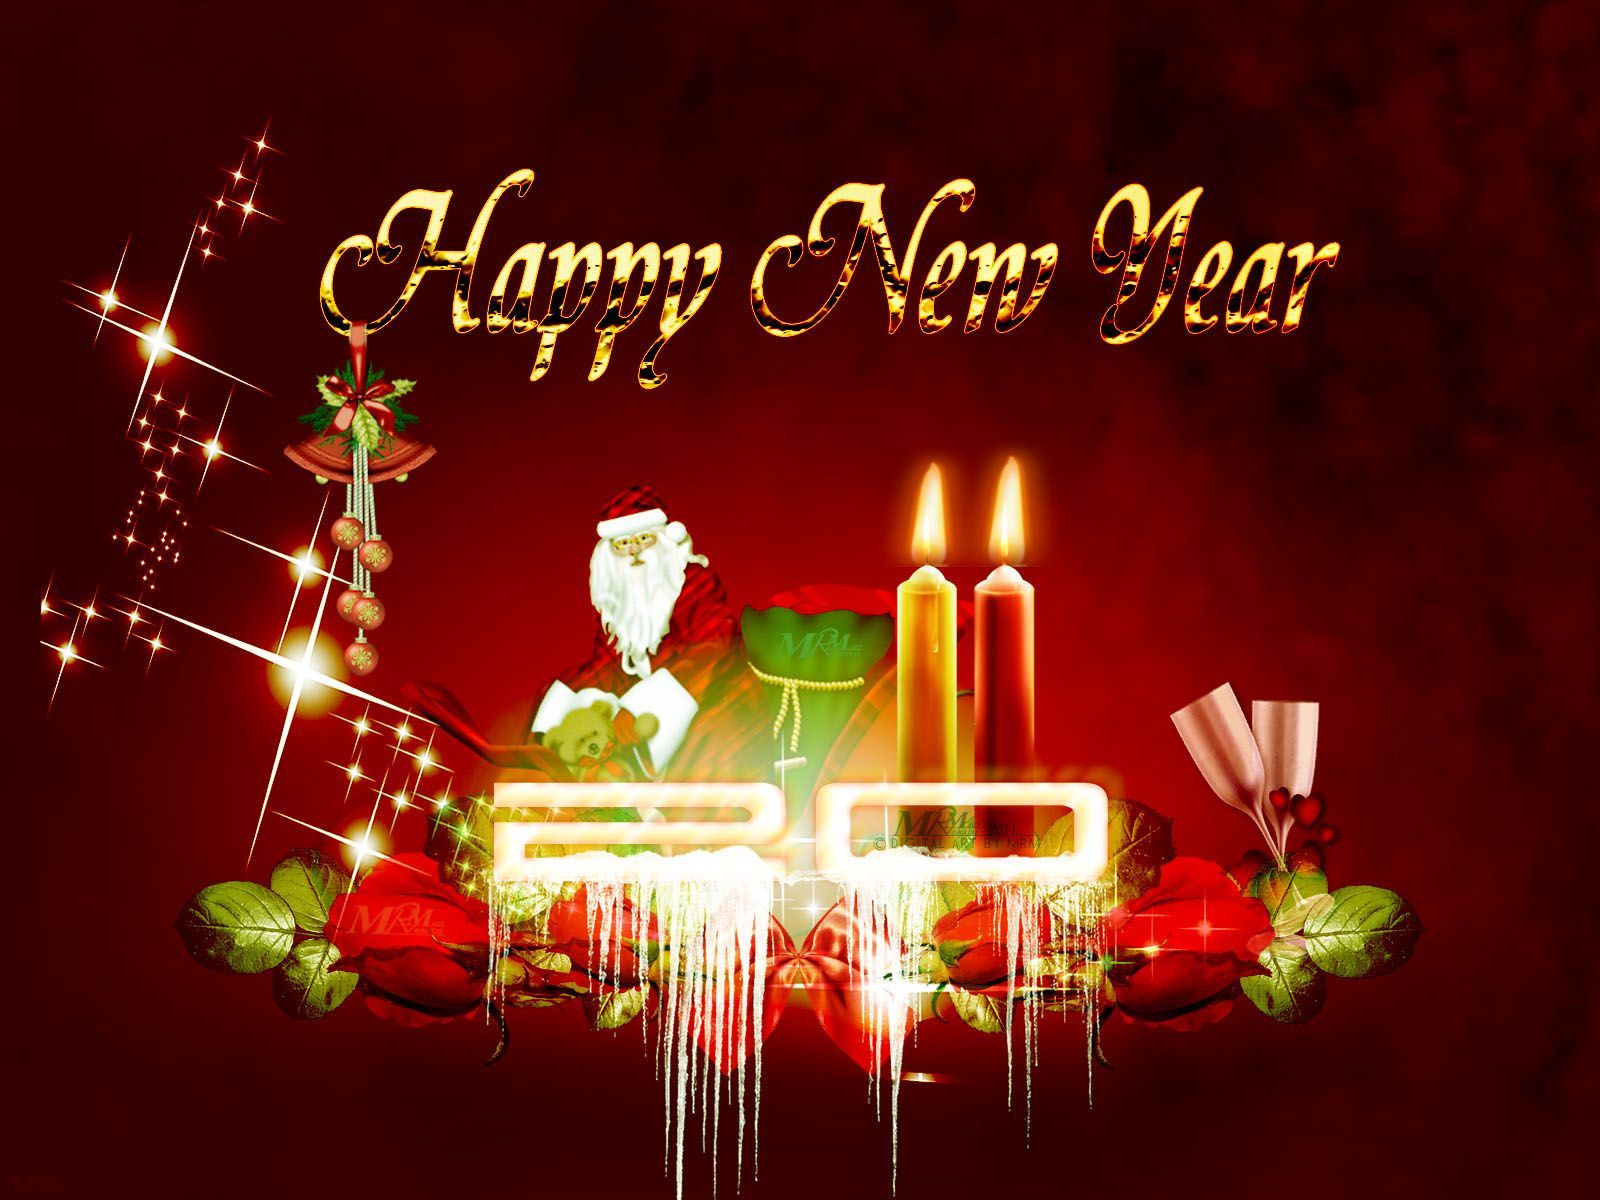 image of Christian New Years. New Year Wallpaper. Free Christian Wallpaper Down. Happy new year wallpaper, Happy new year greetings, New year's eve wallpaper